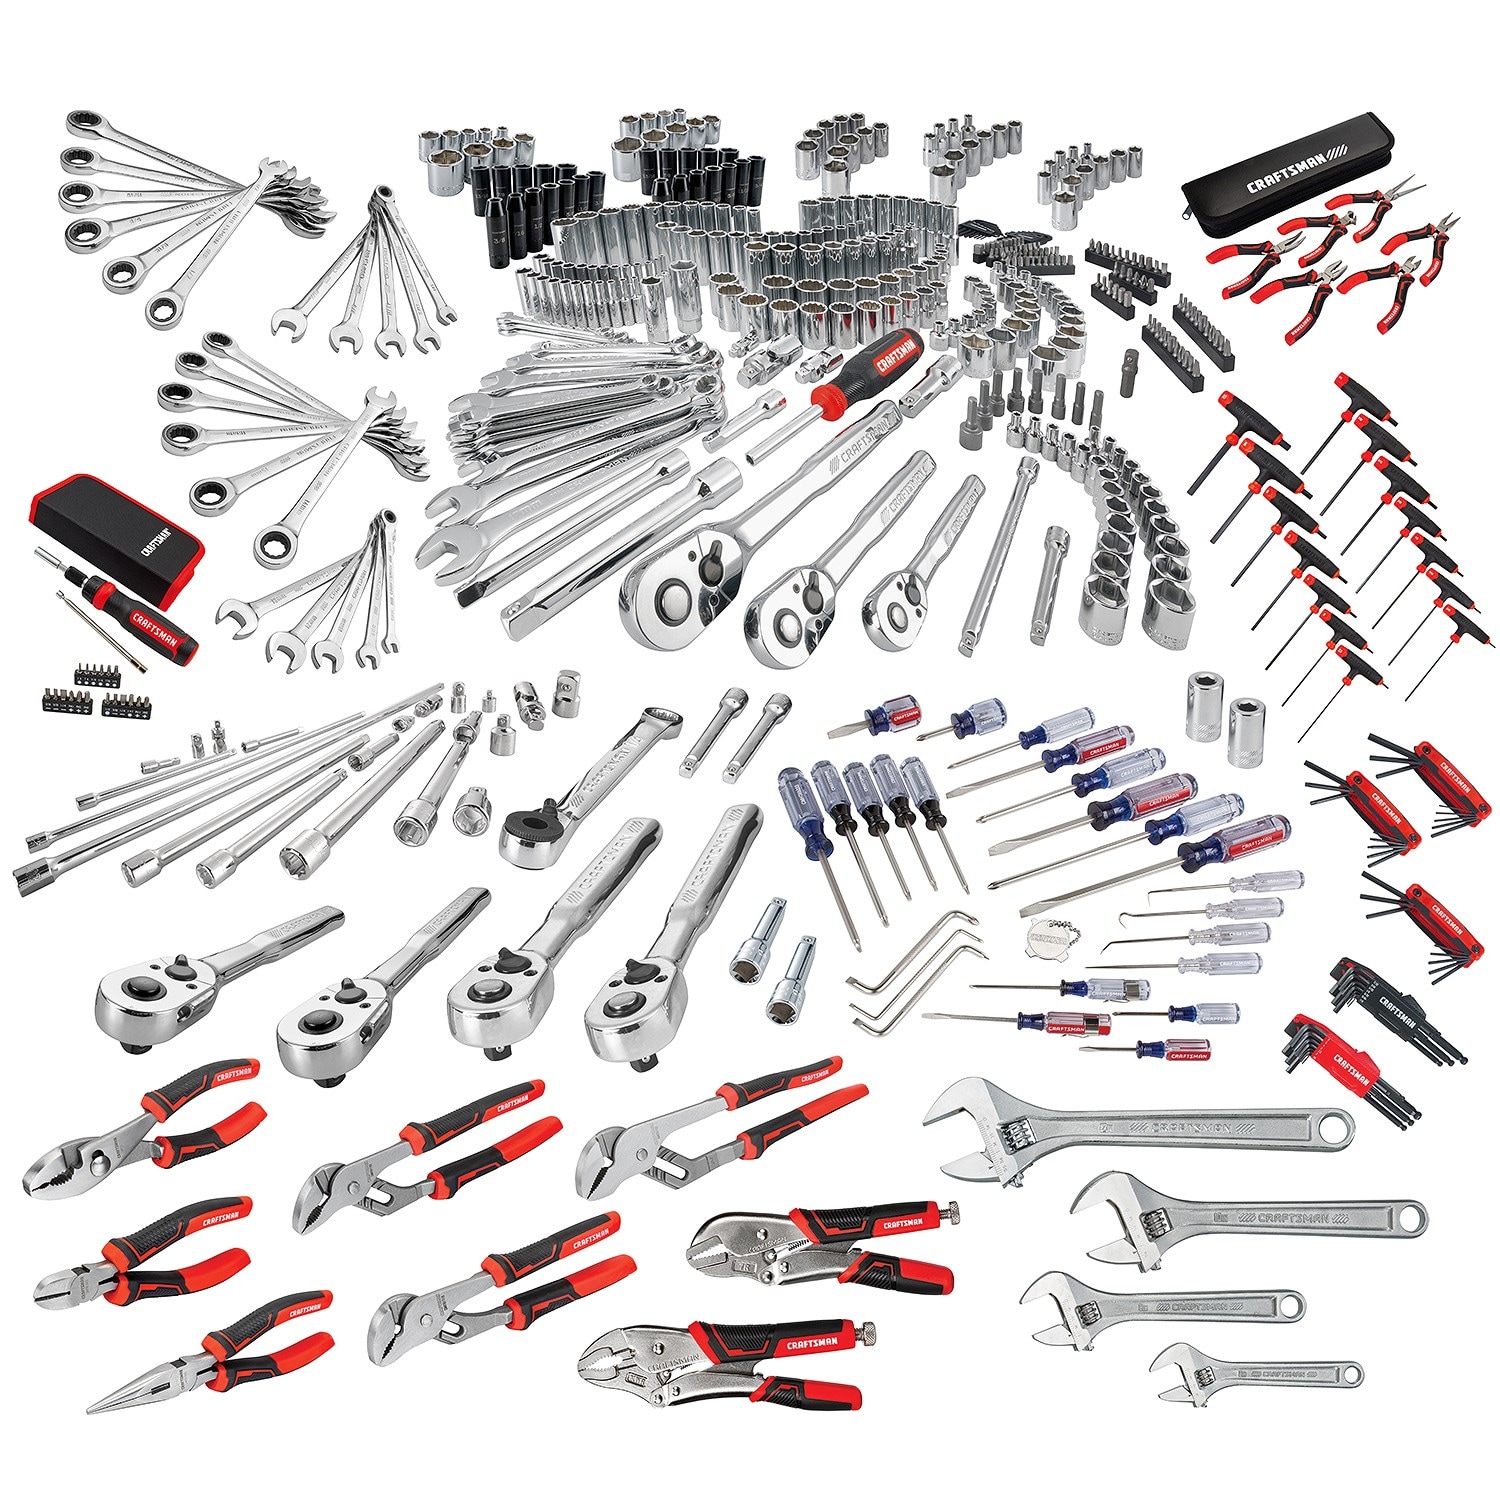 MANY COLORS AVAILABLE CRAFTSMAN 10-IN-1 MINI MULTI TOOL 